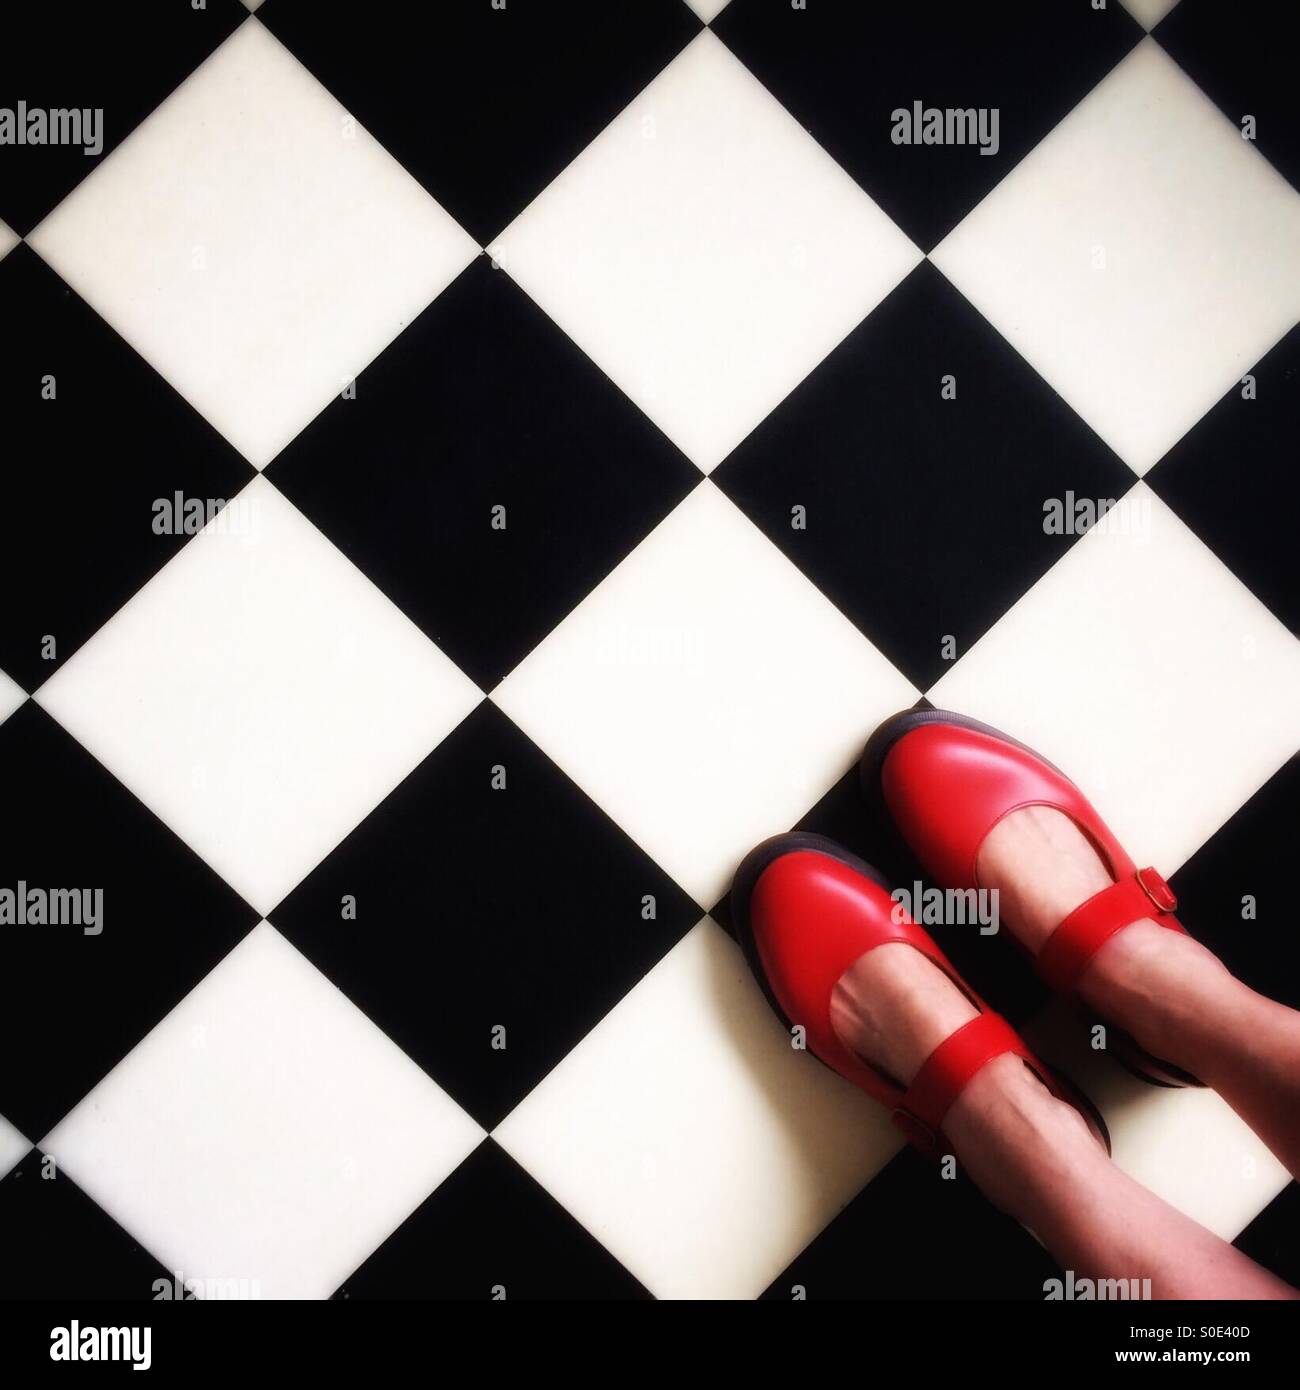 Dr Marten red leather Mary Jane style shoes on a black and white square patterned retro style floor. Stock Photo